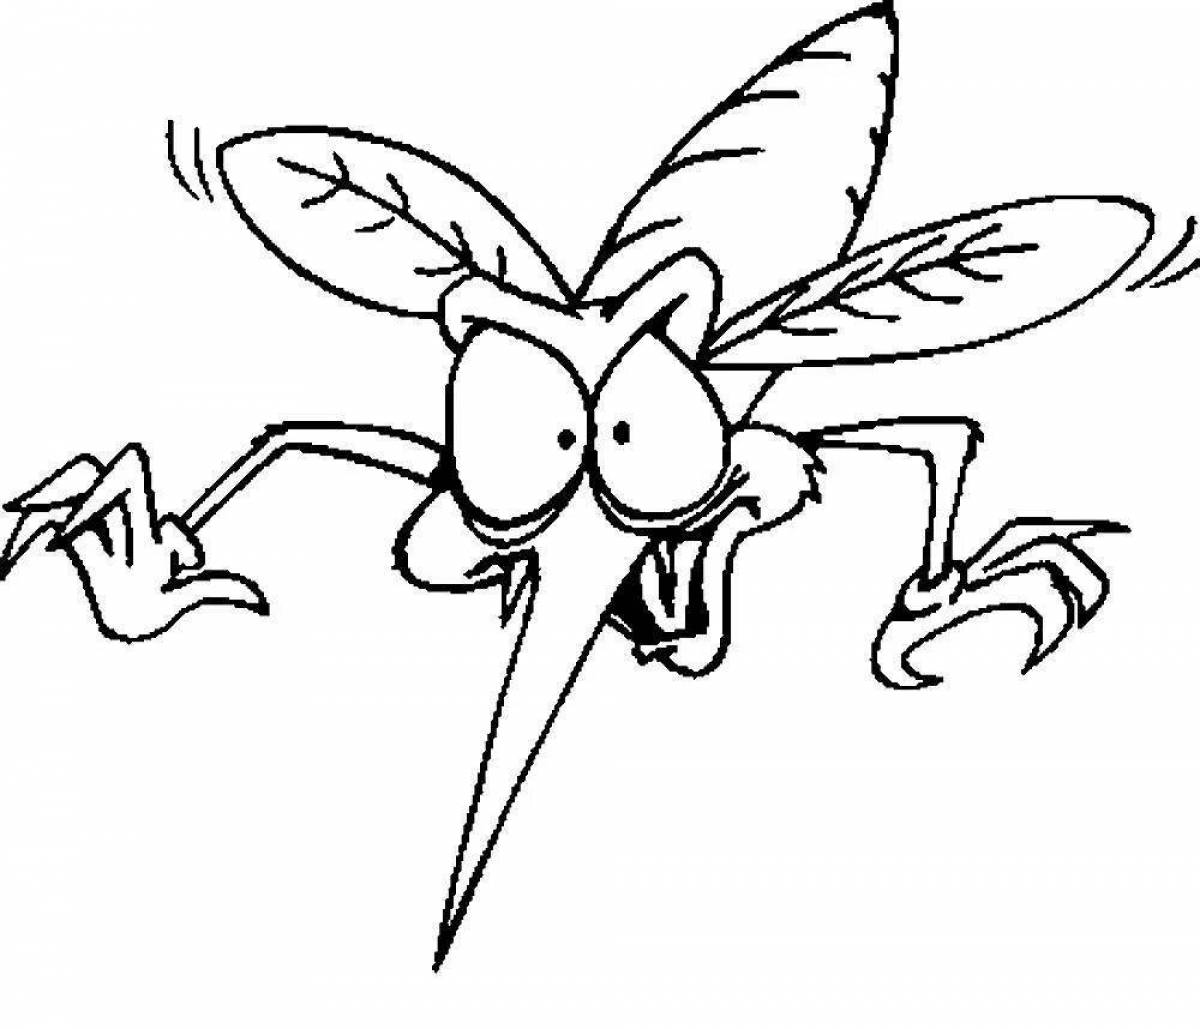 Playful mosquito coloring page